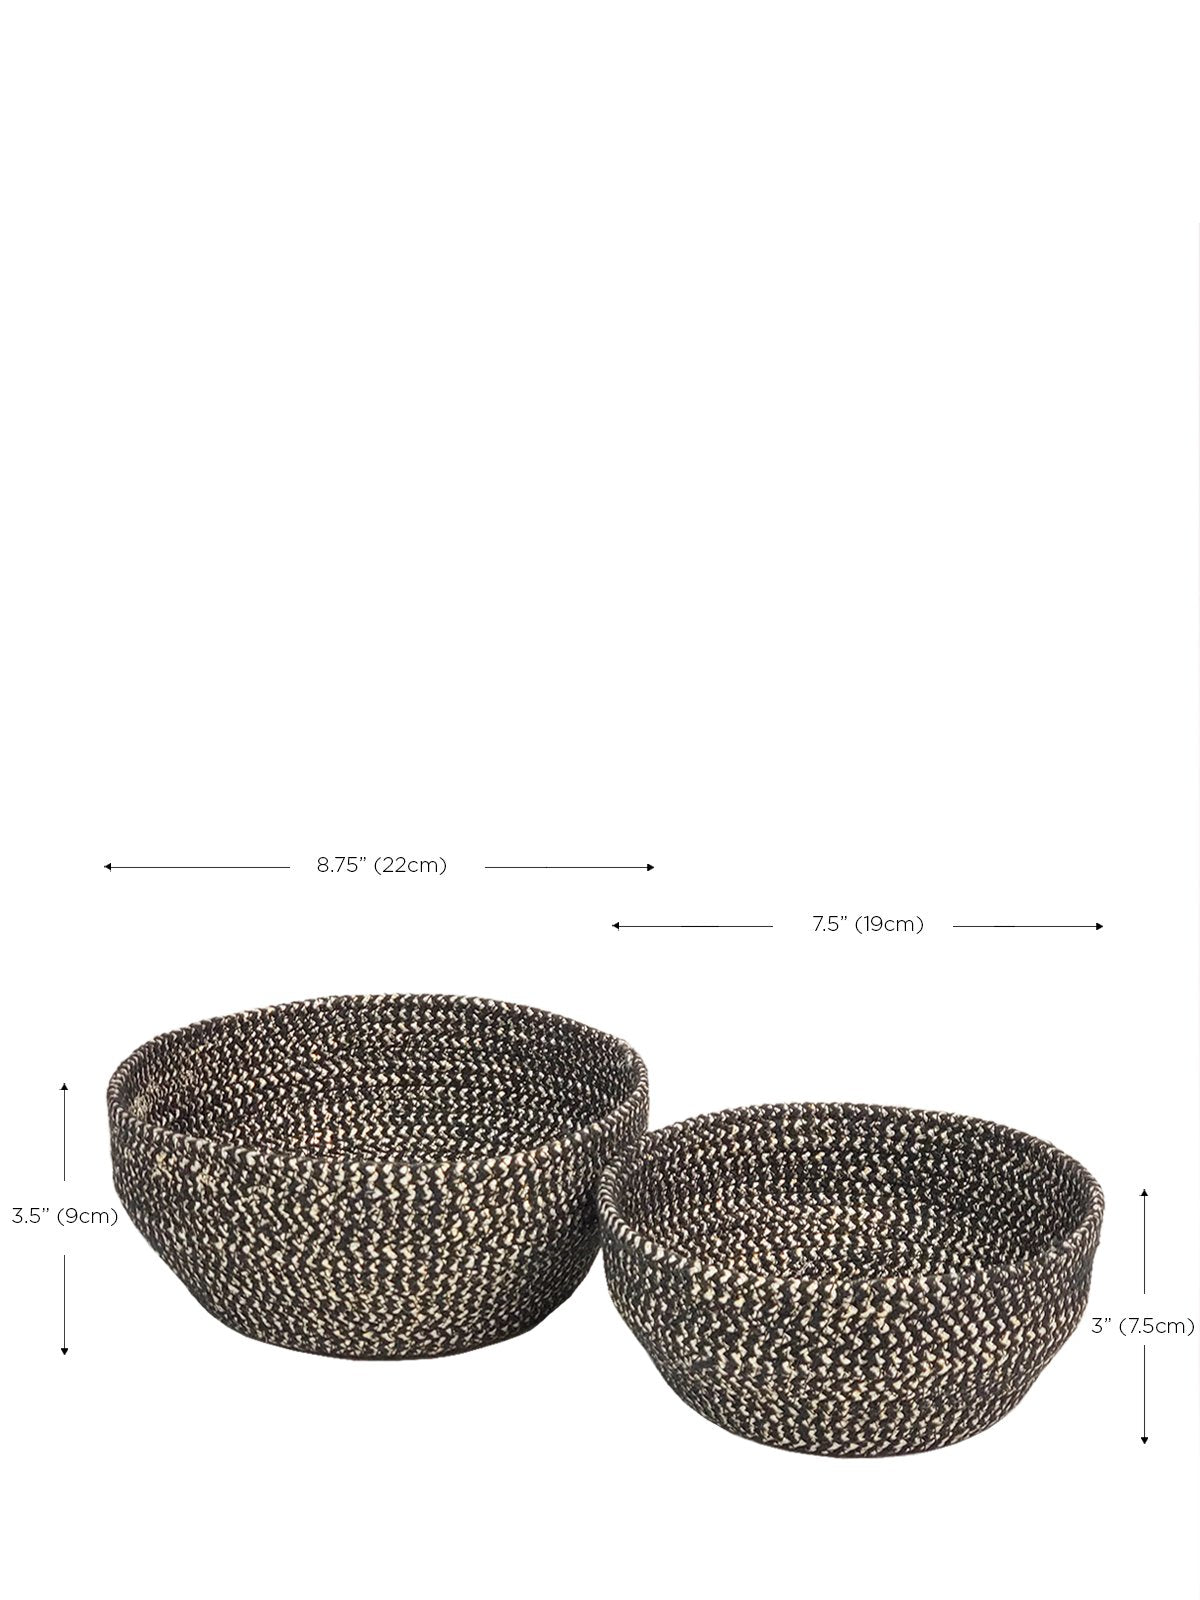 Glitter Bowl - Set of 2 - Black and gold with dimensions. 